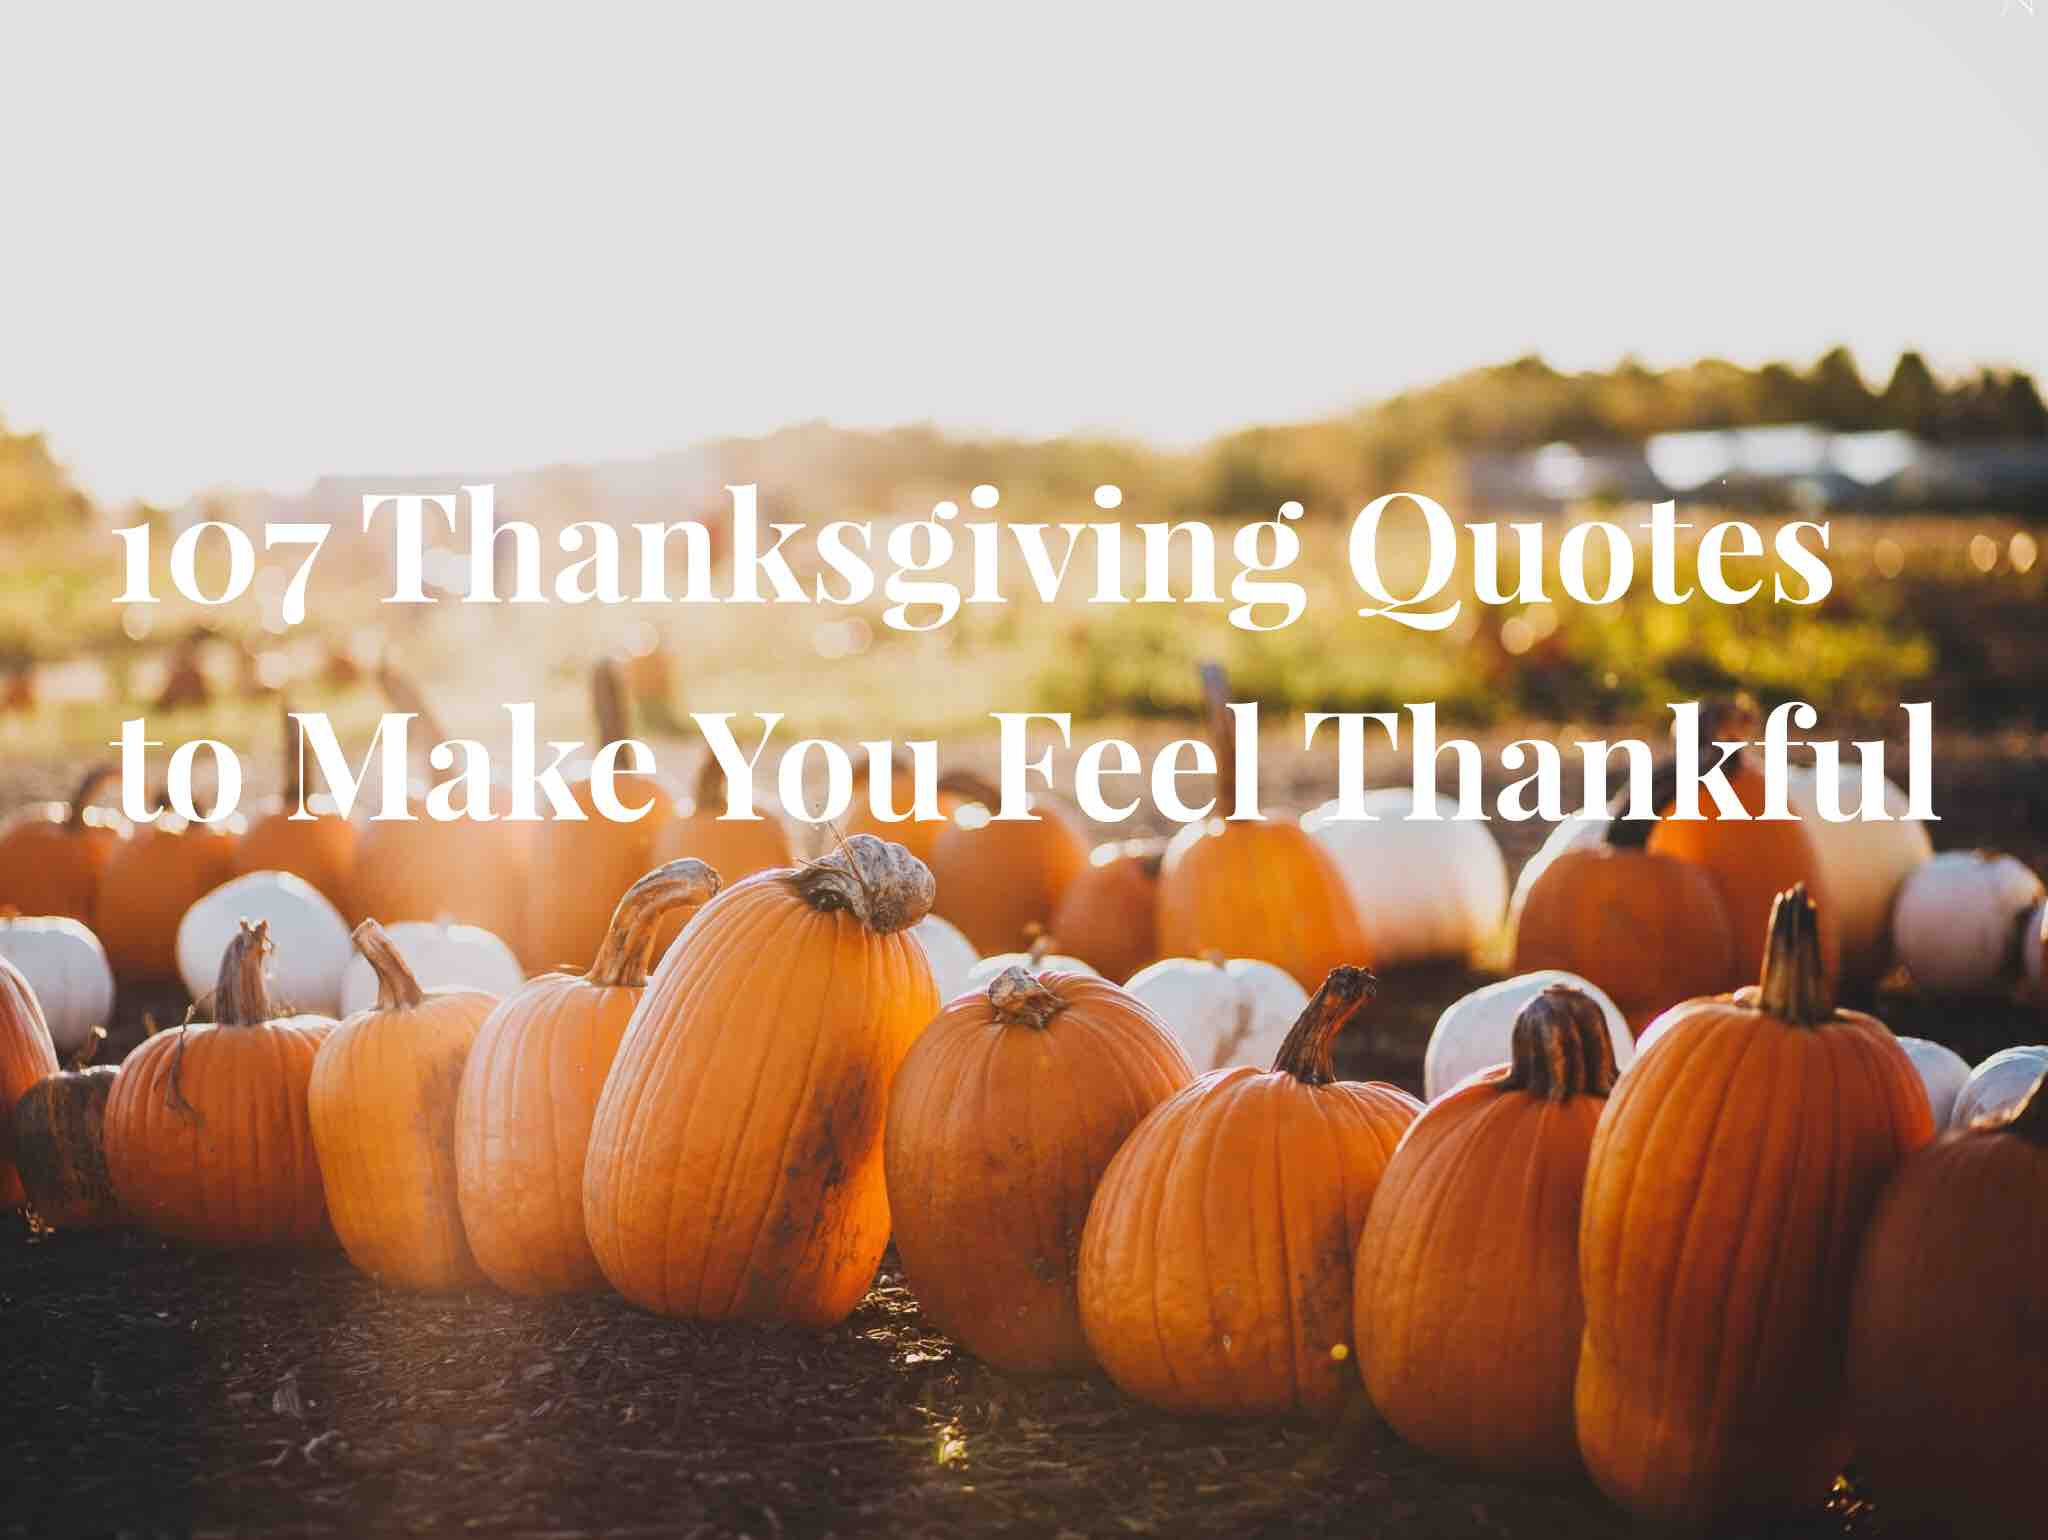 Thanksgiving Quotes Gratitude
 107 Thanksgiving Quotes to Make You Feel Thankful